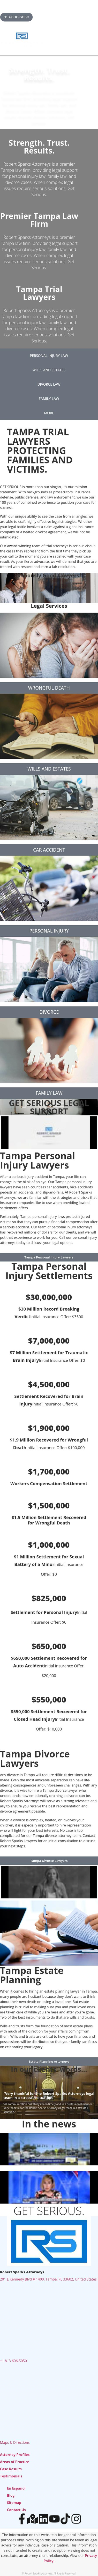 Robert Sparks Attorneys - Tampa FL Lawyers